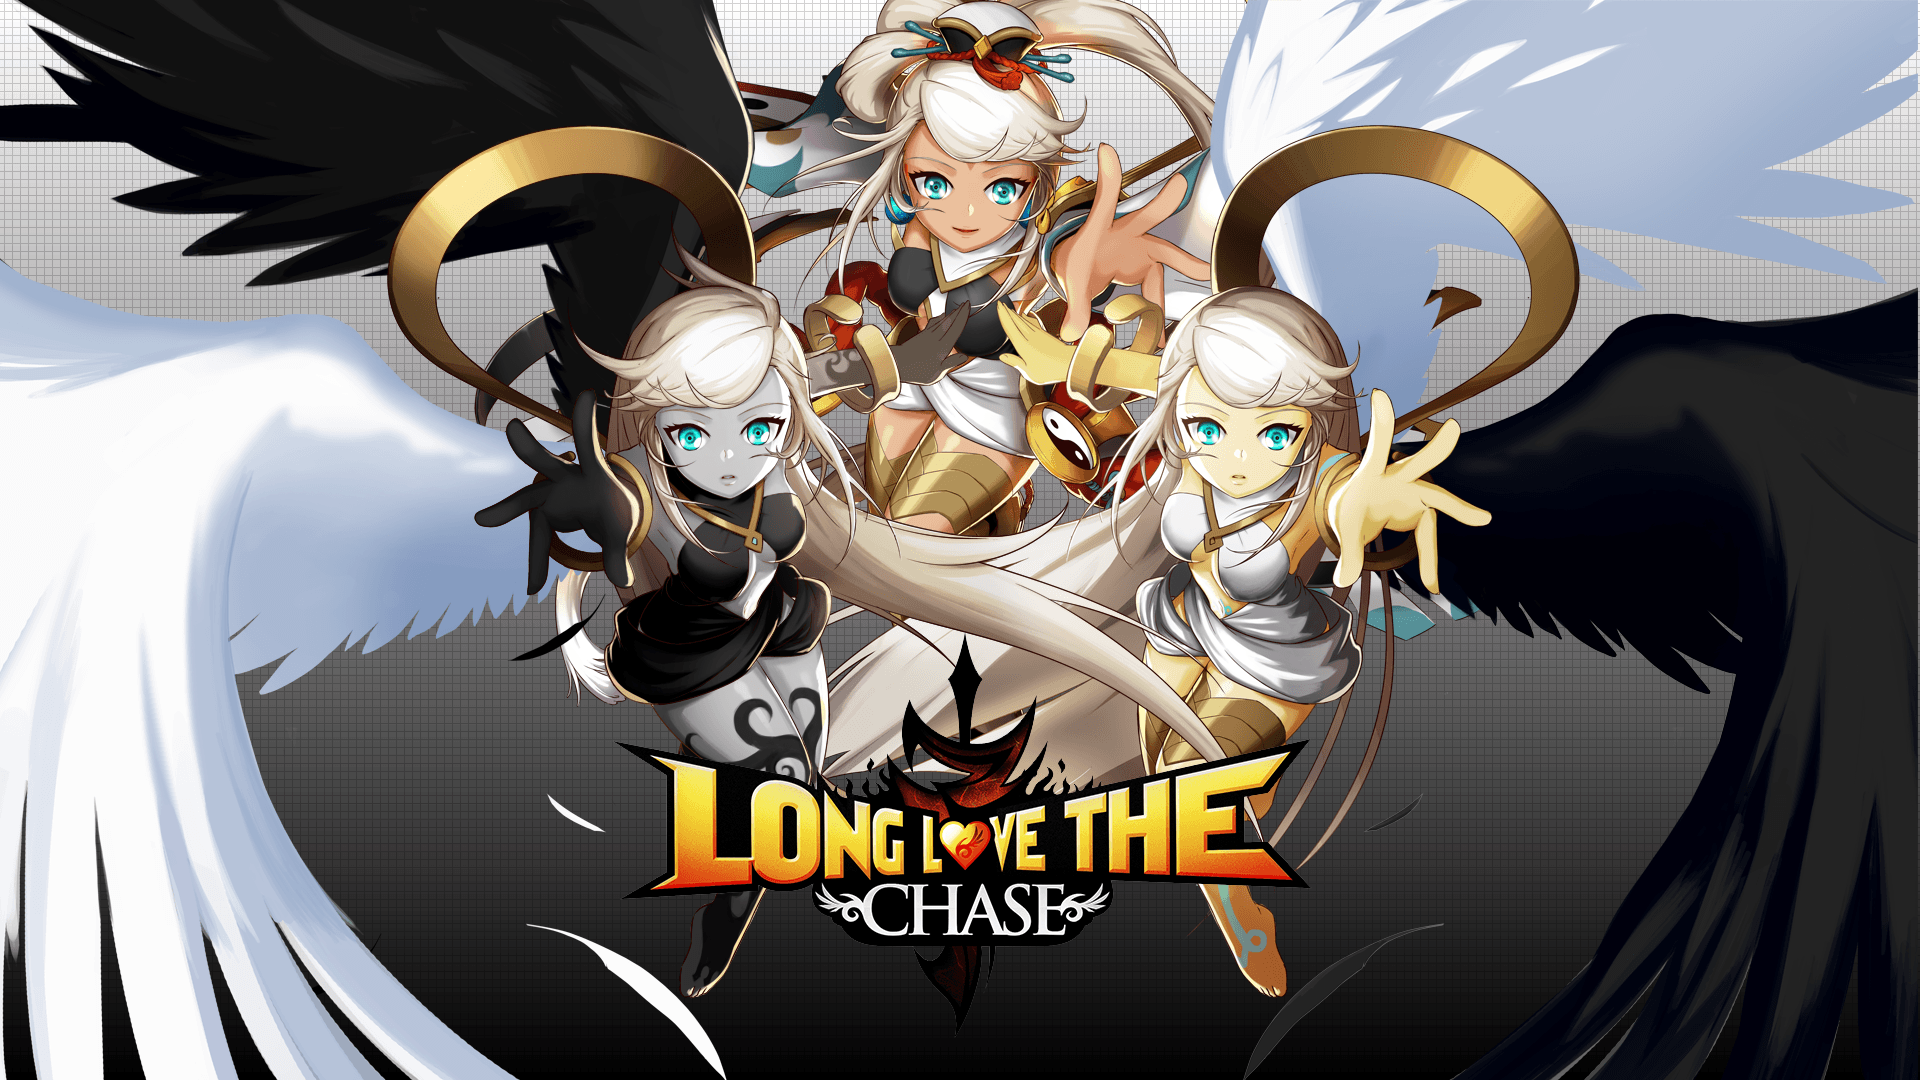 HD wallpaper featuring Grand Chase characters with the slogan Long Live the Chase, perfect for desktop background.